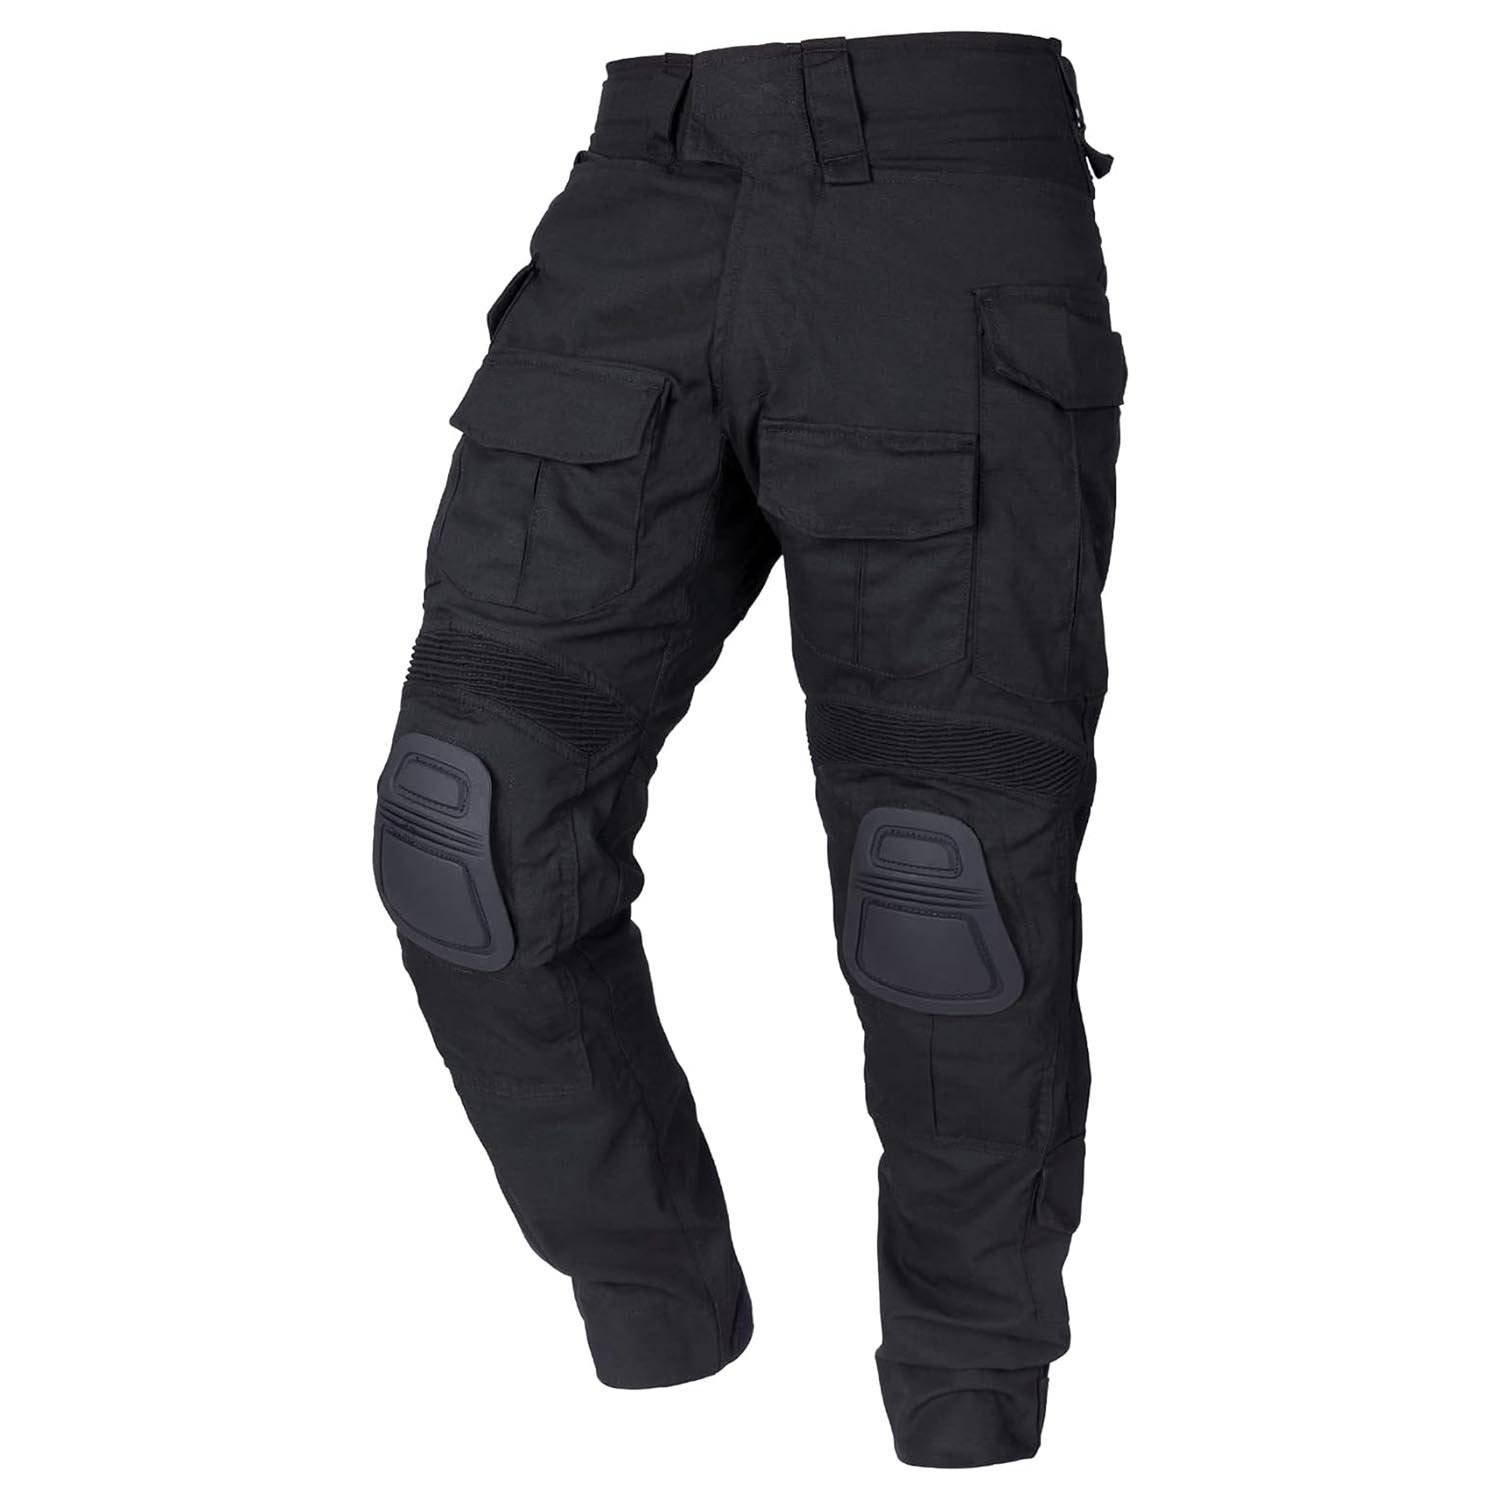 CRYE PRECISION G3 ALL WEATHER COMBAT PANTS